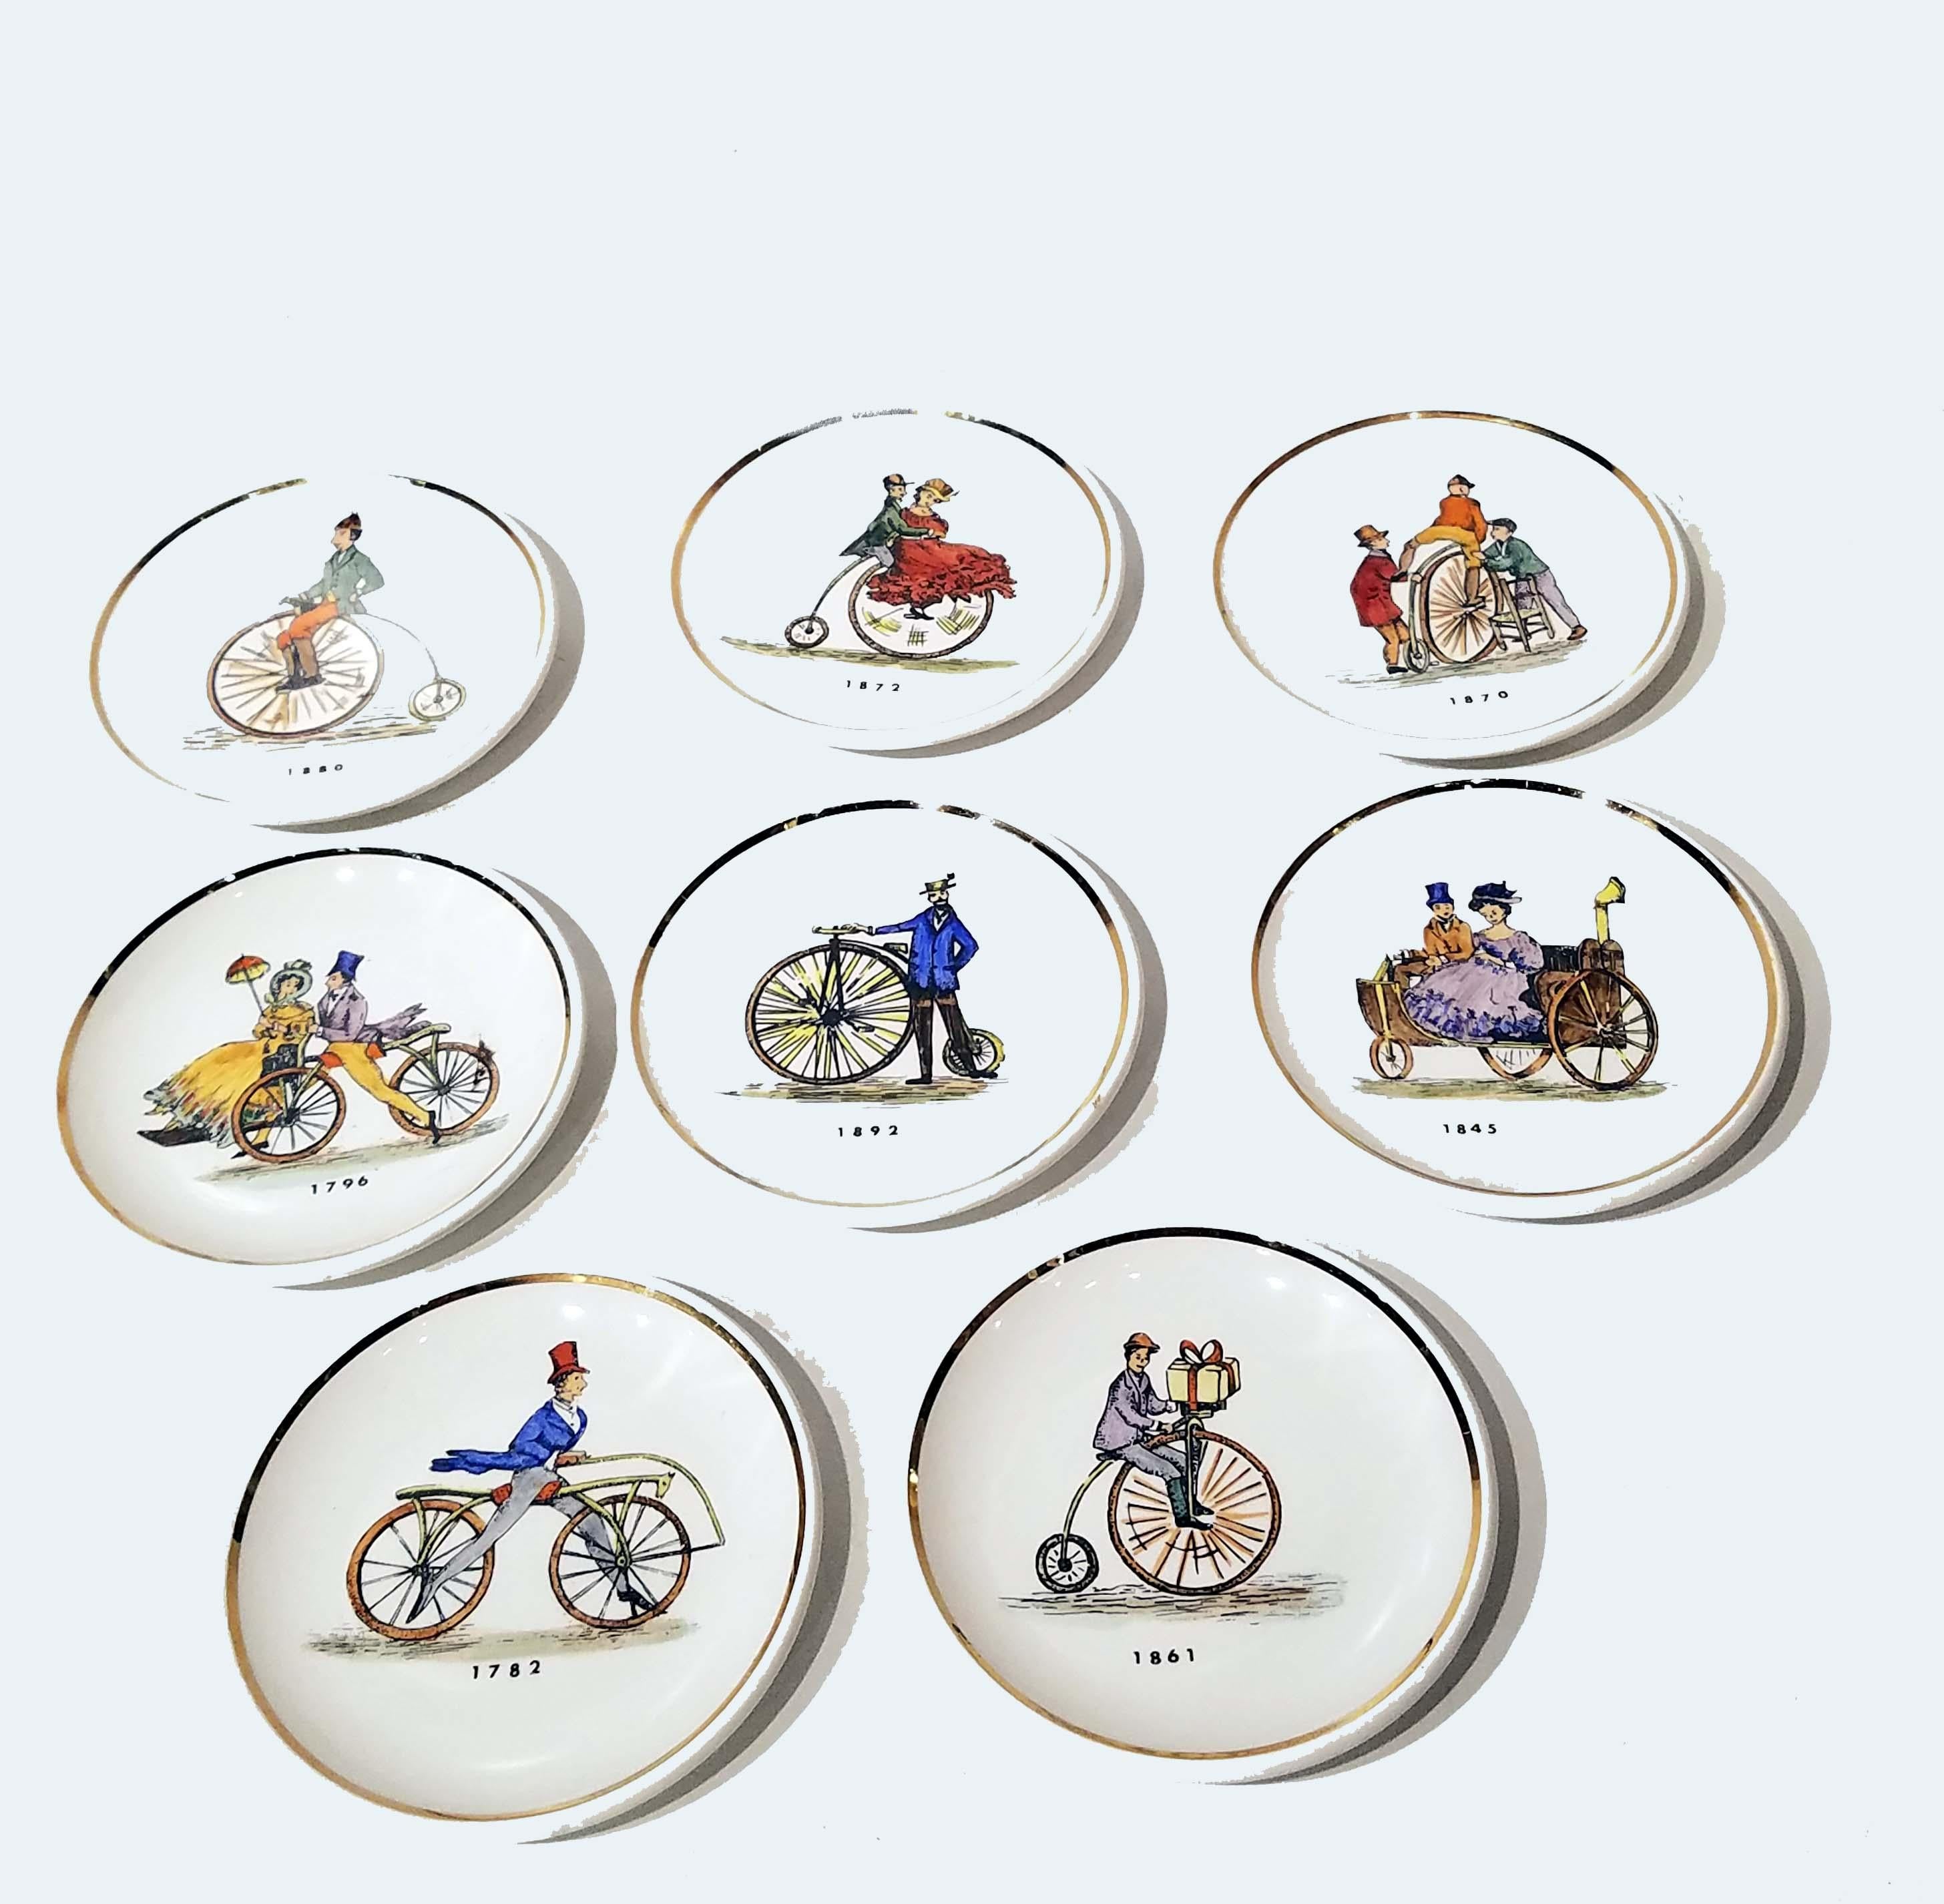 Bucciarelli a set of 8 ceramic costars of antique bicycles.
Each hand colored and dated with different types of bicycles from different eras.
Marked in the back.